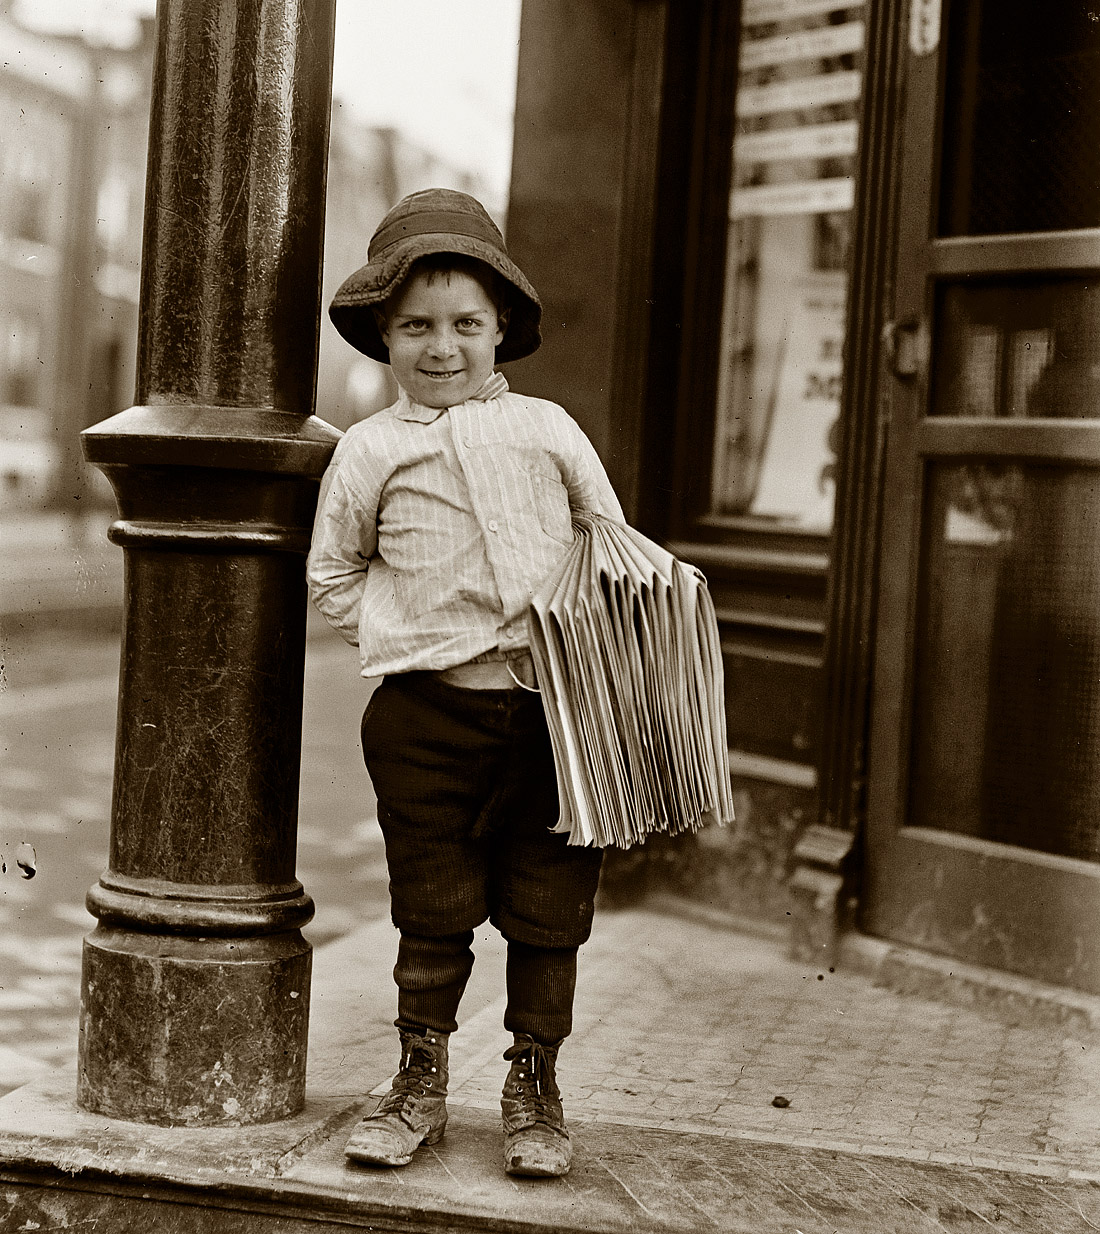 May 9, 1910. St. Louis, Mo. "Newsboy. Little Fattie. Less than 40 inches high, 6 years old. Been at it one year." View full size. Photo by Lewis Wickes Hine.